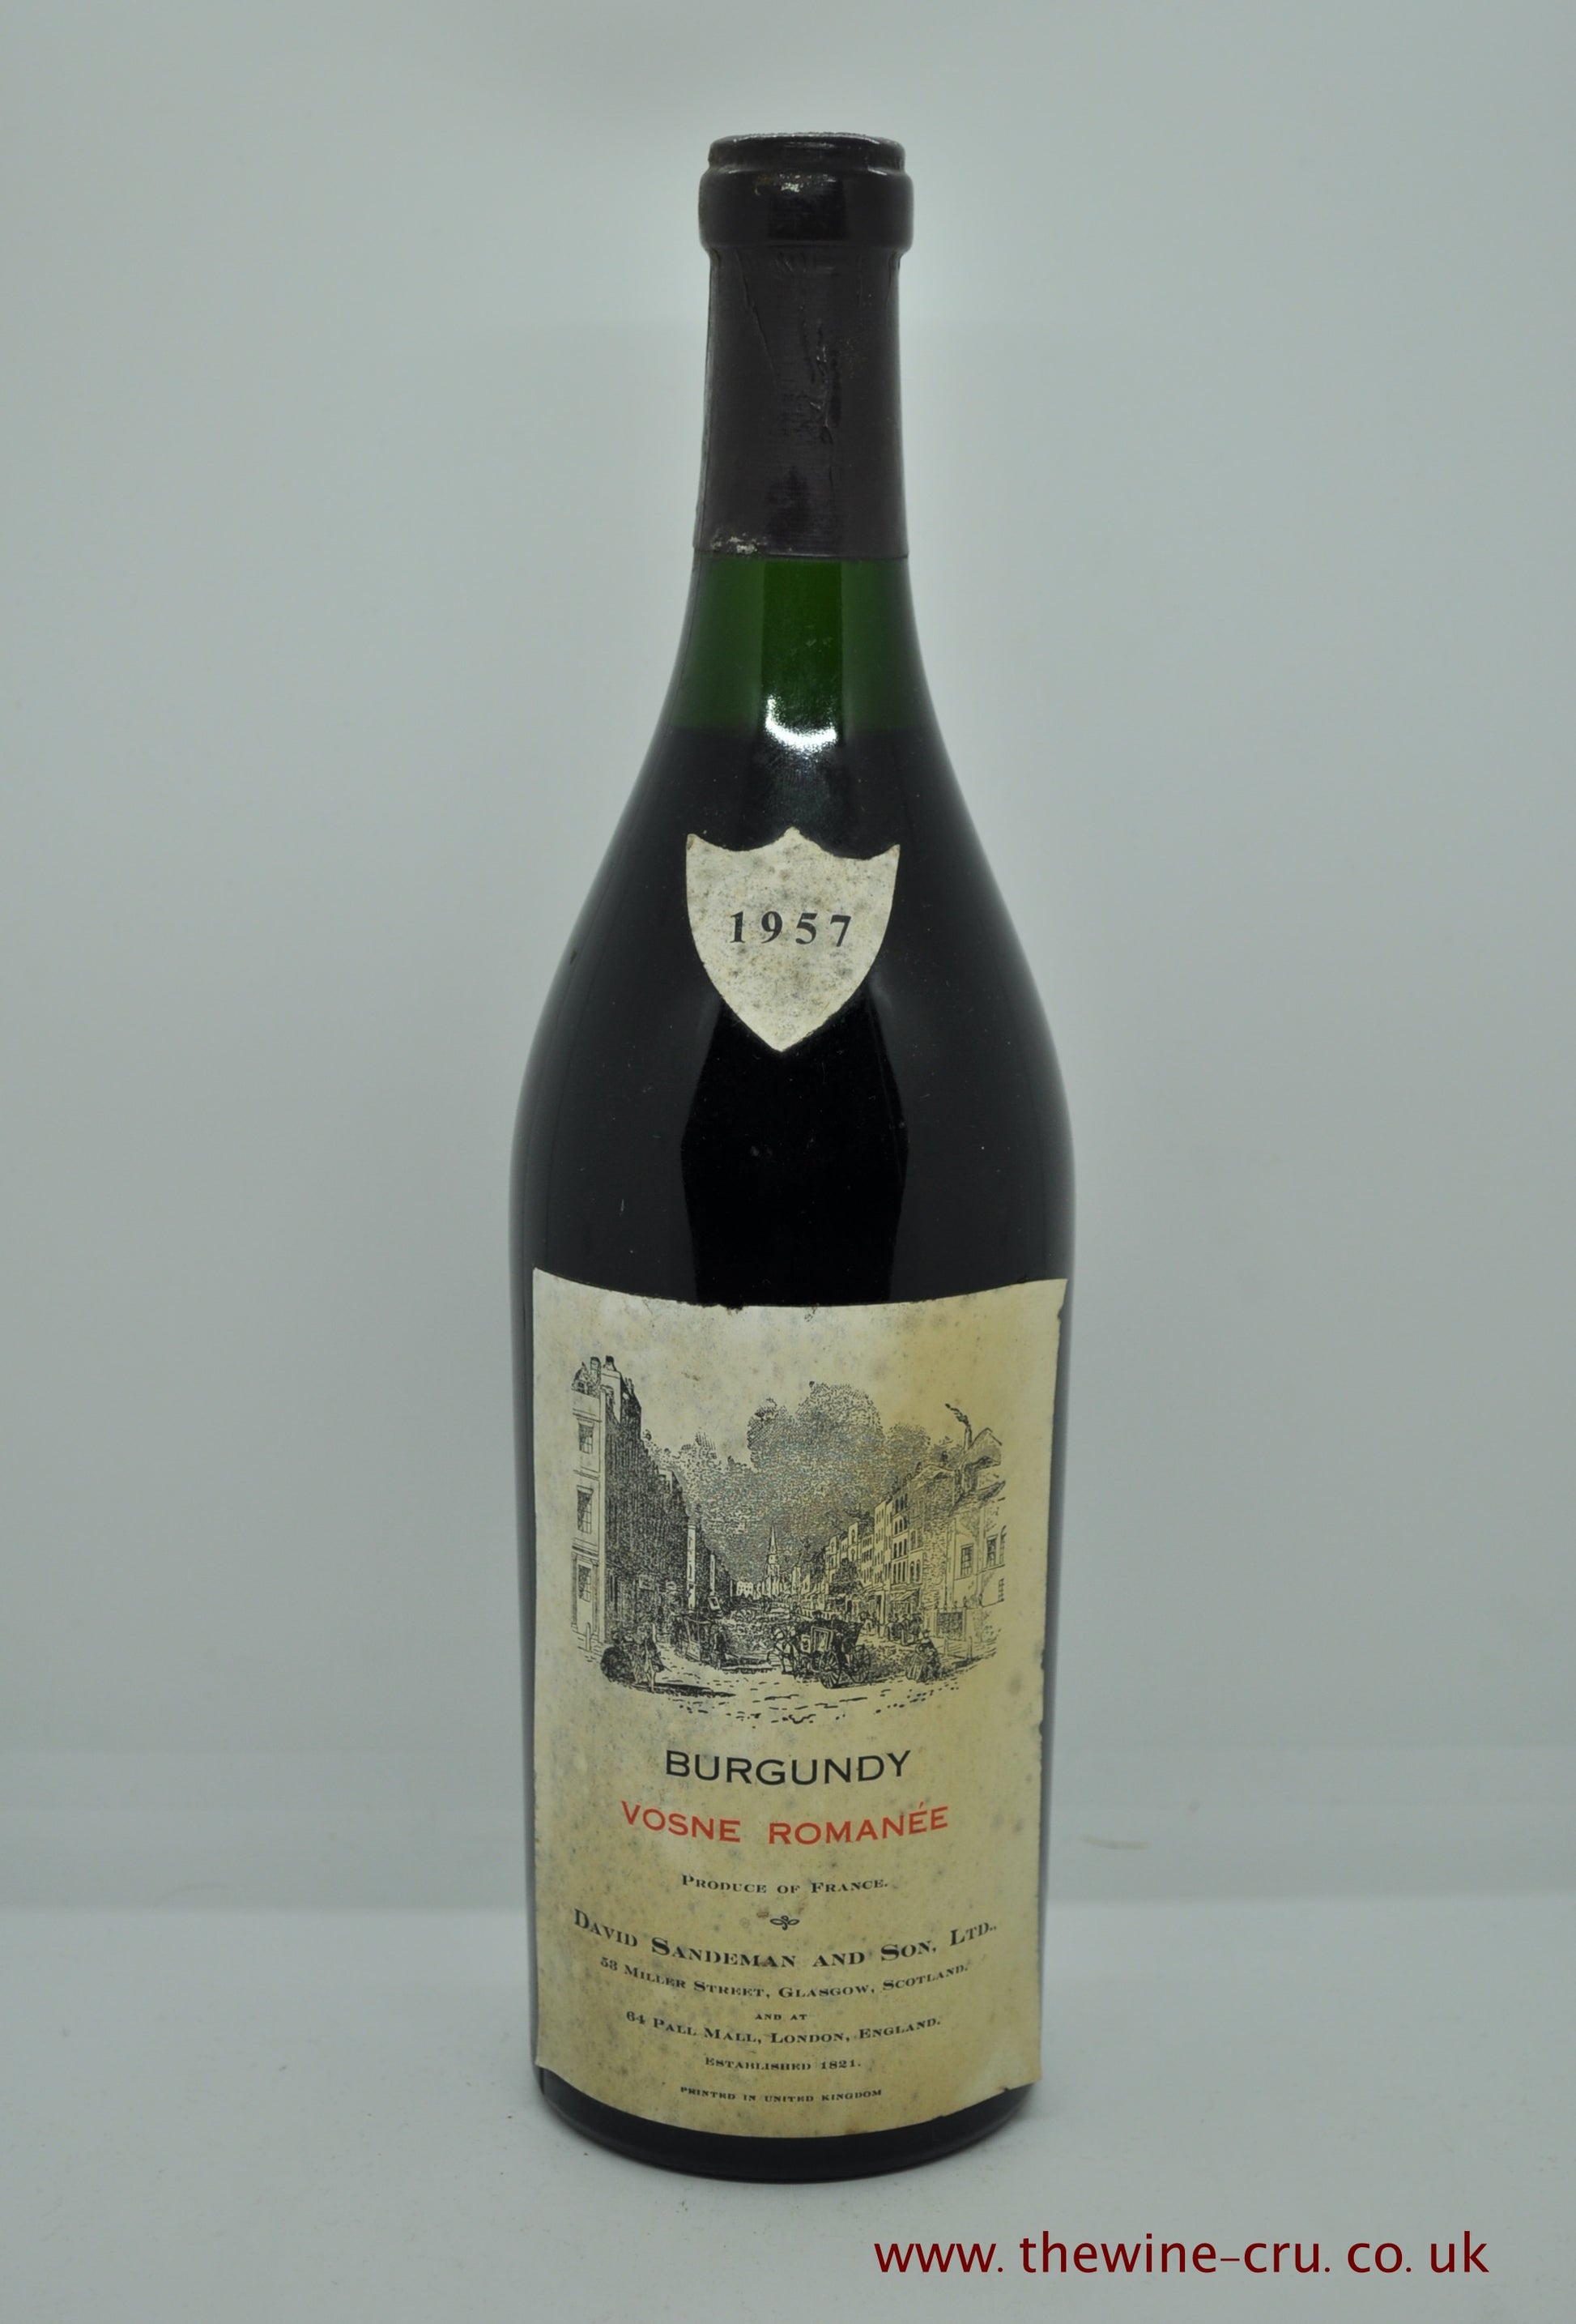 1957 vintage red wine. Vosnee Romanee , shipped by British merchant David Sandeman and Sons Ltd. The bottle is in good condition with the wine level about 3cm below the cork. Immediate delivery. Free local delivery. Gift wrapping available.